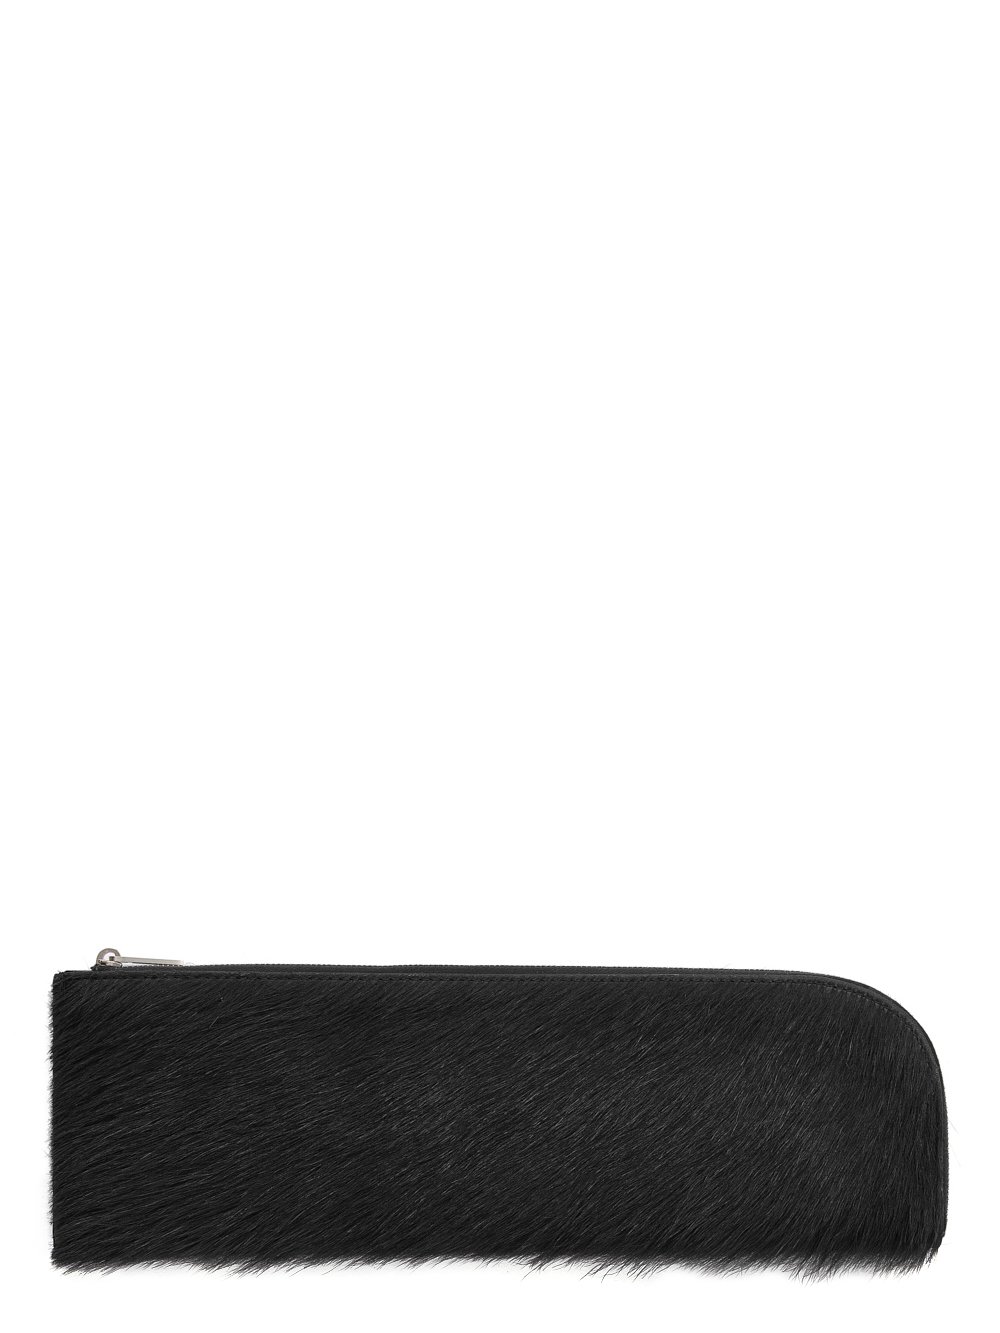 RICK OWENS FW23 LUXOR RICK WALLET EXTENDED IN BLACK UNSHAVED COW LEATHER